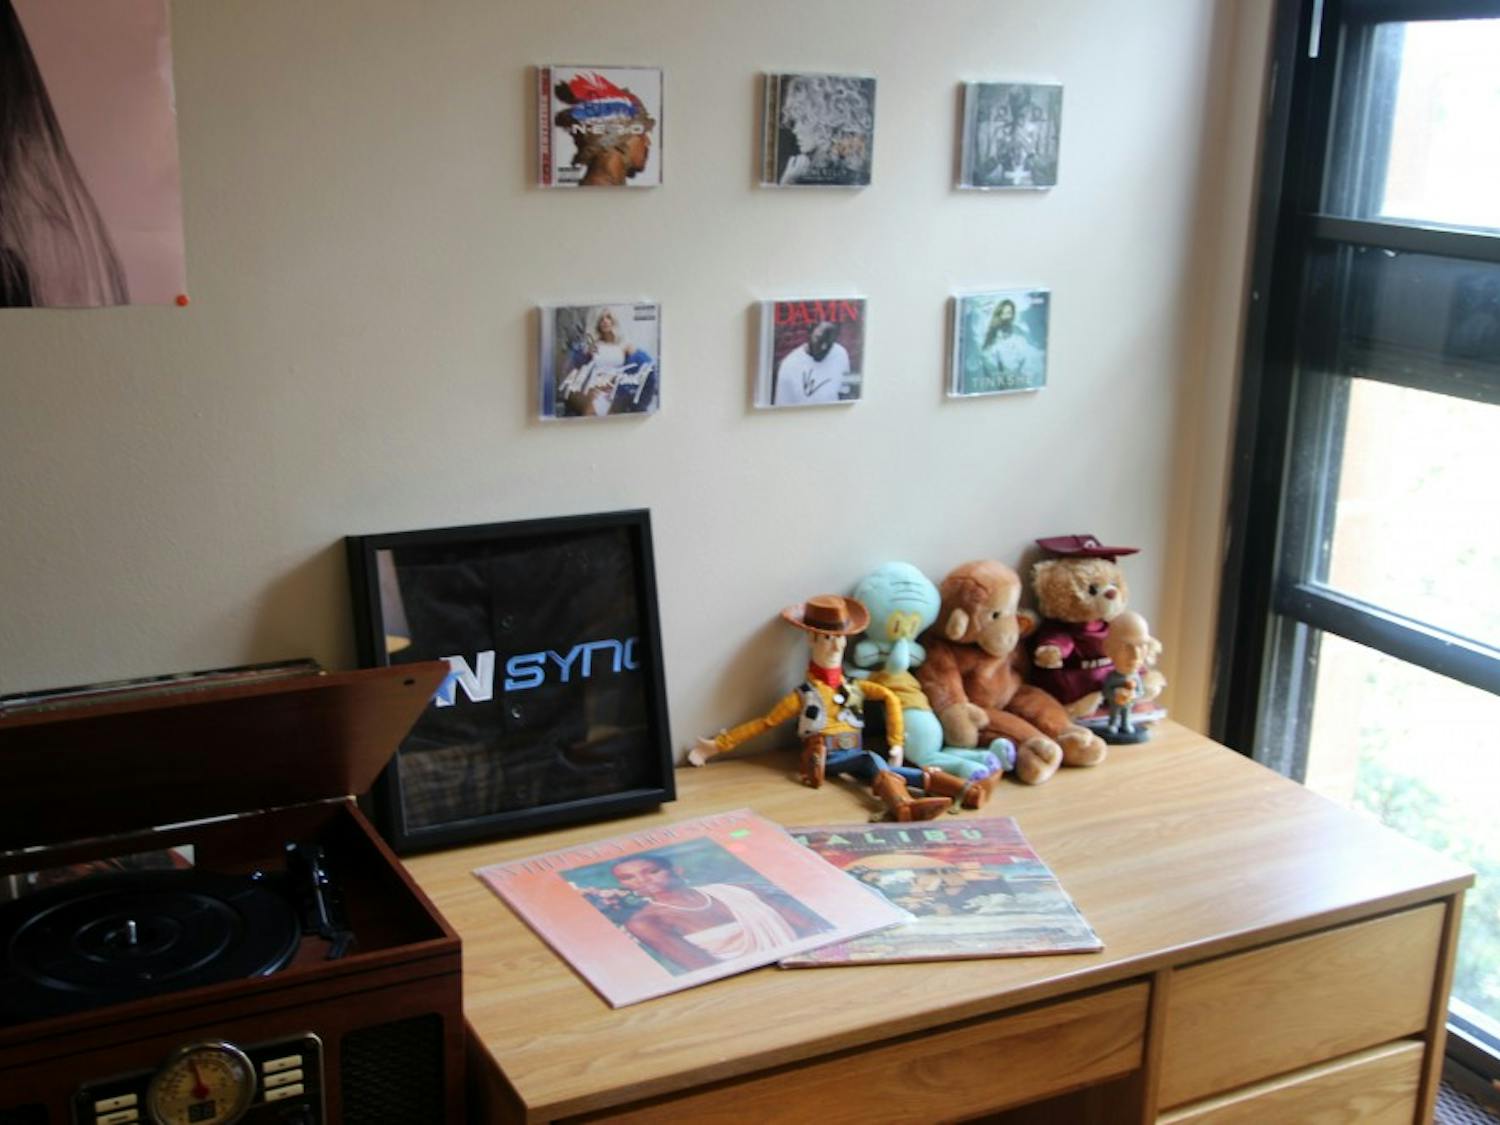 Vinyl, autographed items, and plush toys can add a unique spark to just about any dorm room. Not only are these items nice to look at, but they serve as great conversation starters.